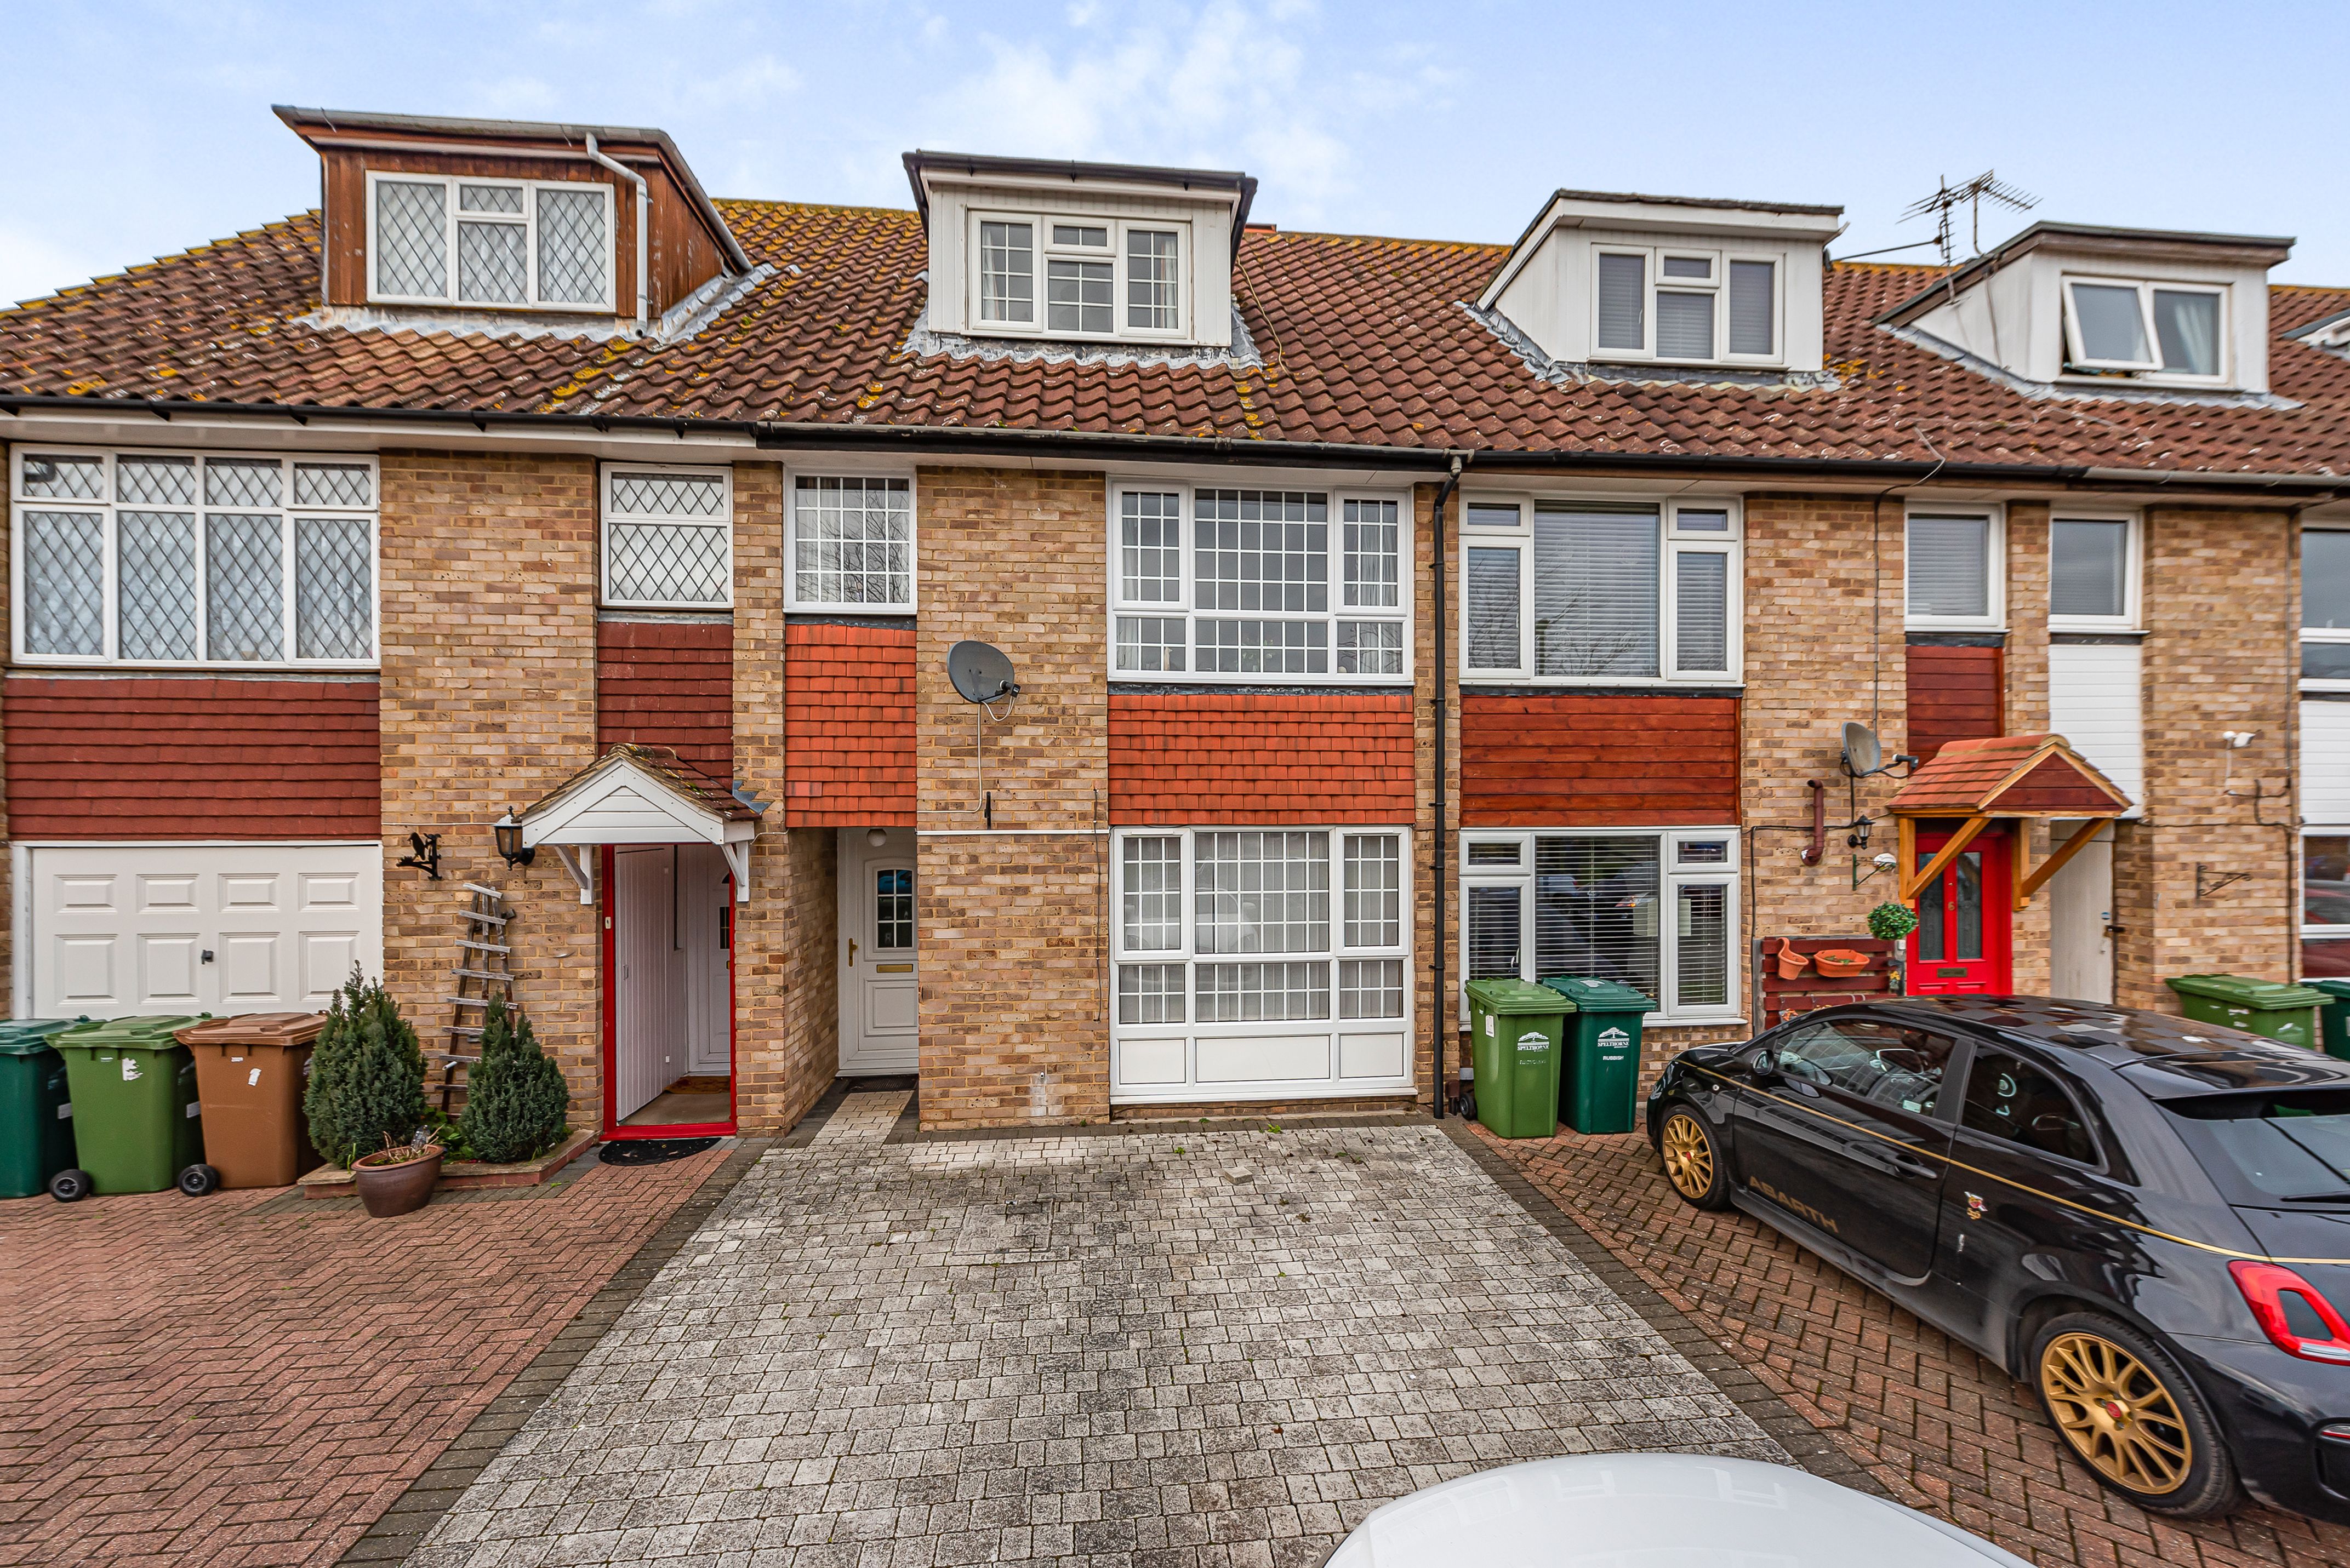 4 bed terraced house for sale in Bingham Drive, Staines-Upon-Thames 0